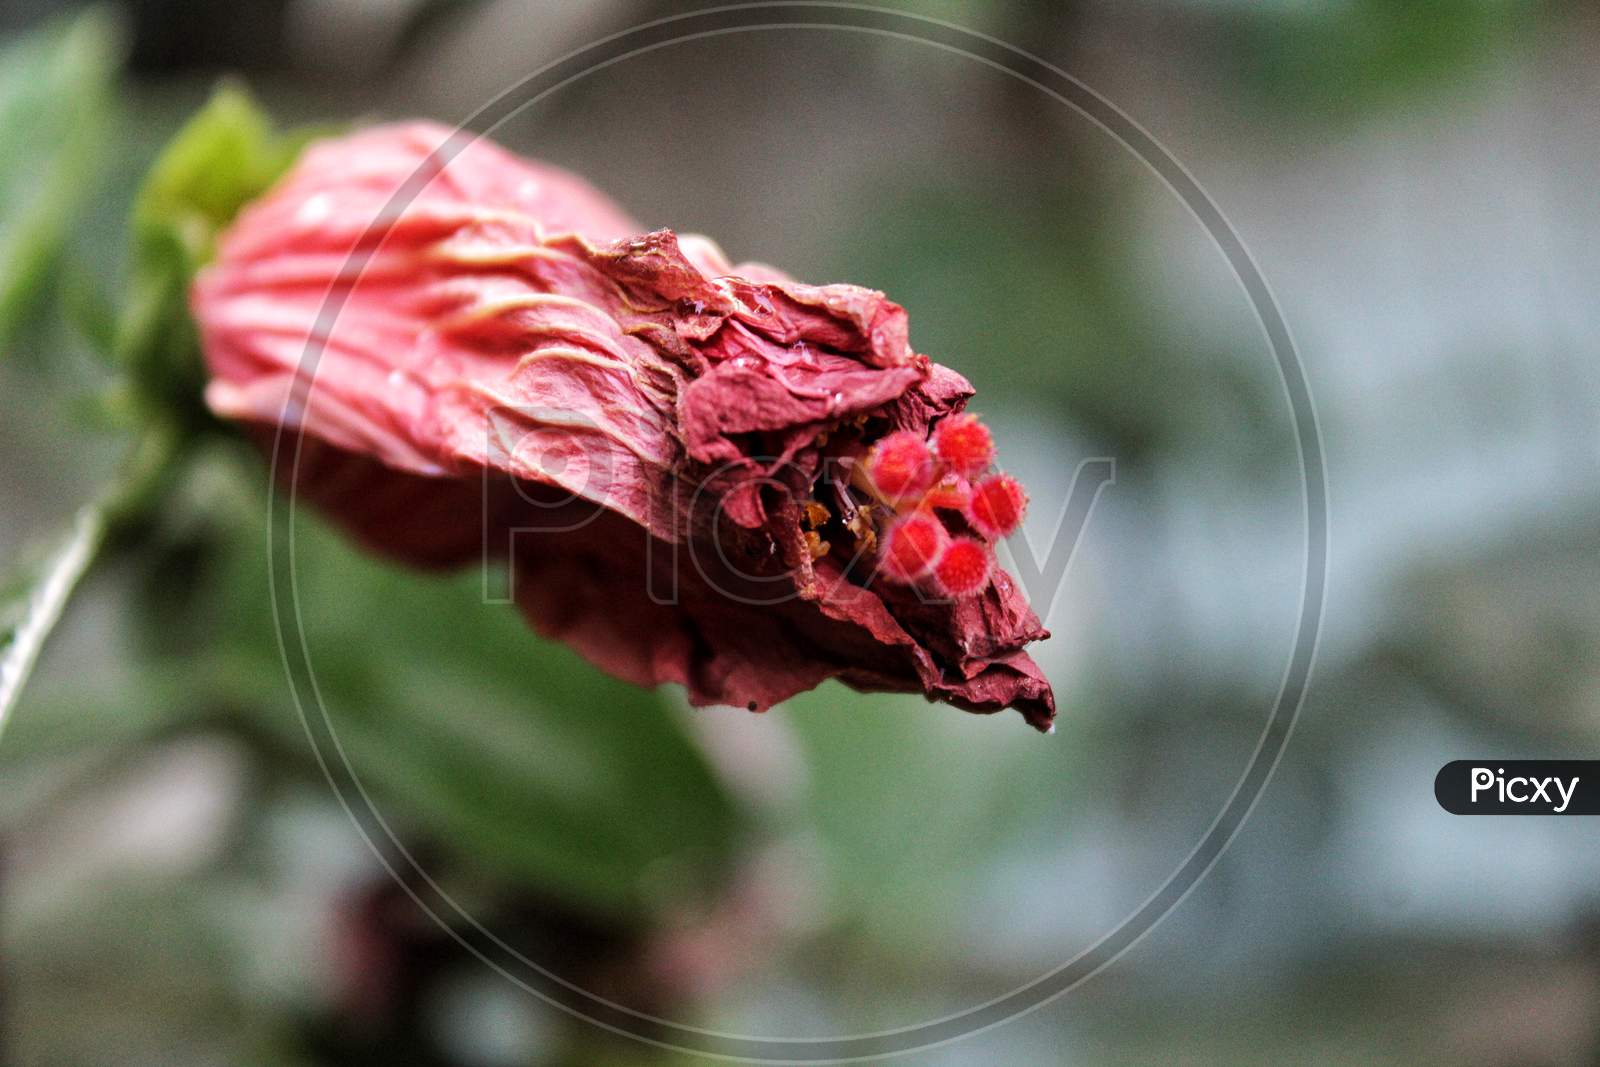 Filament of a dried red Hibiscus flower